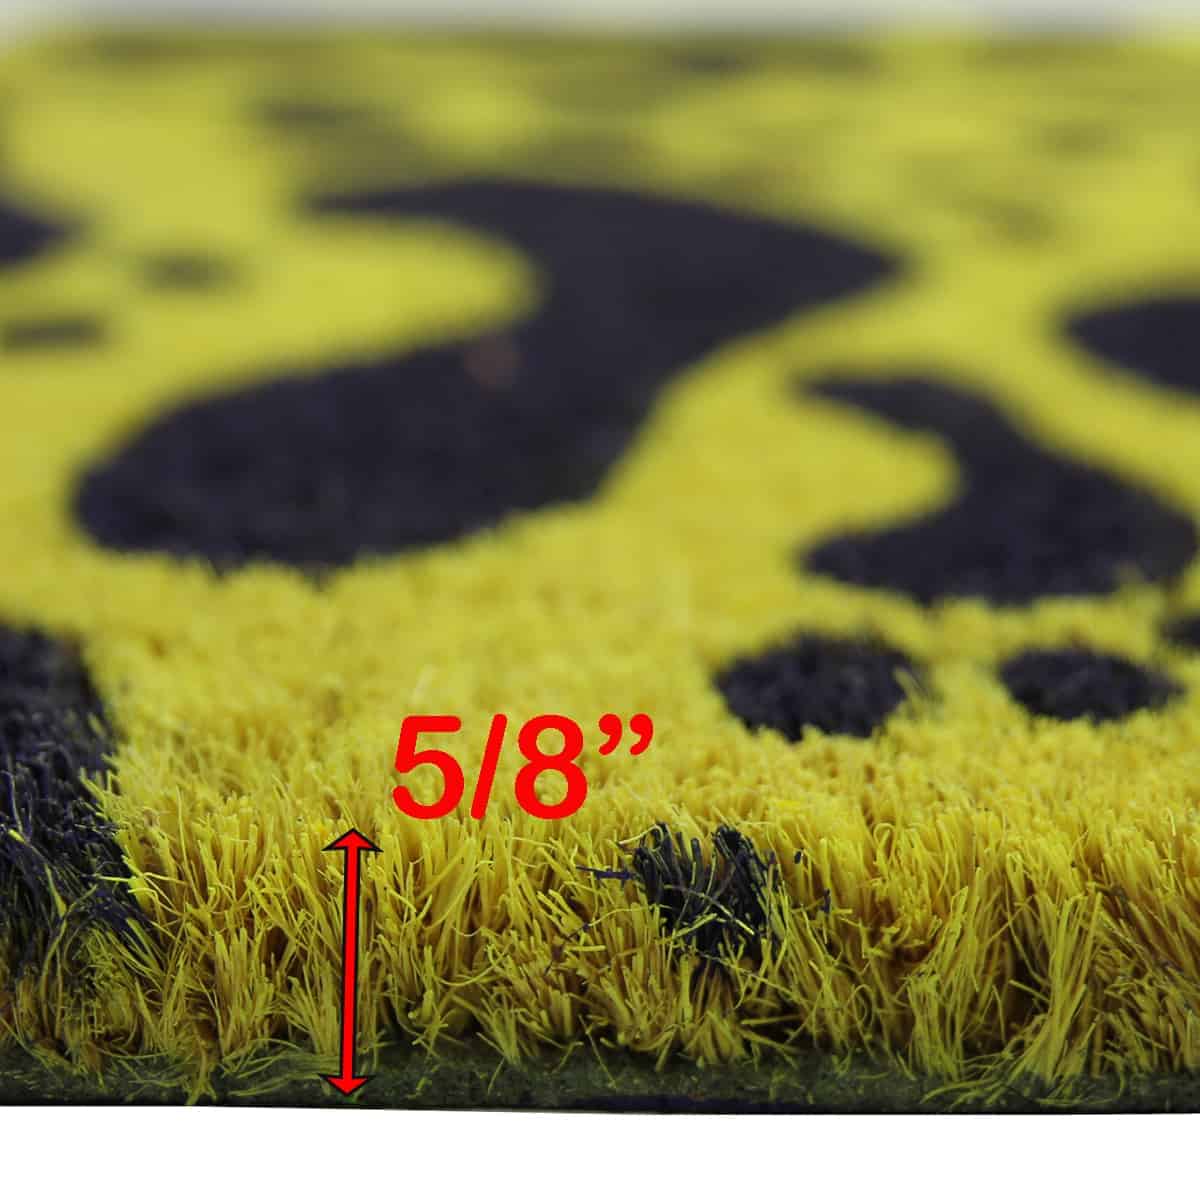 Sheltered Printed Front Door Mat Footprints Coir Coco Fibers Rug 24x16 Yellow and Black